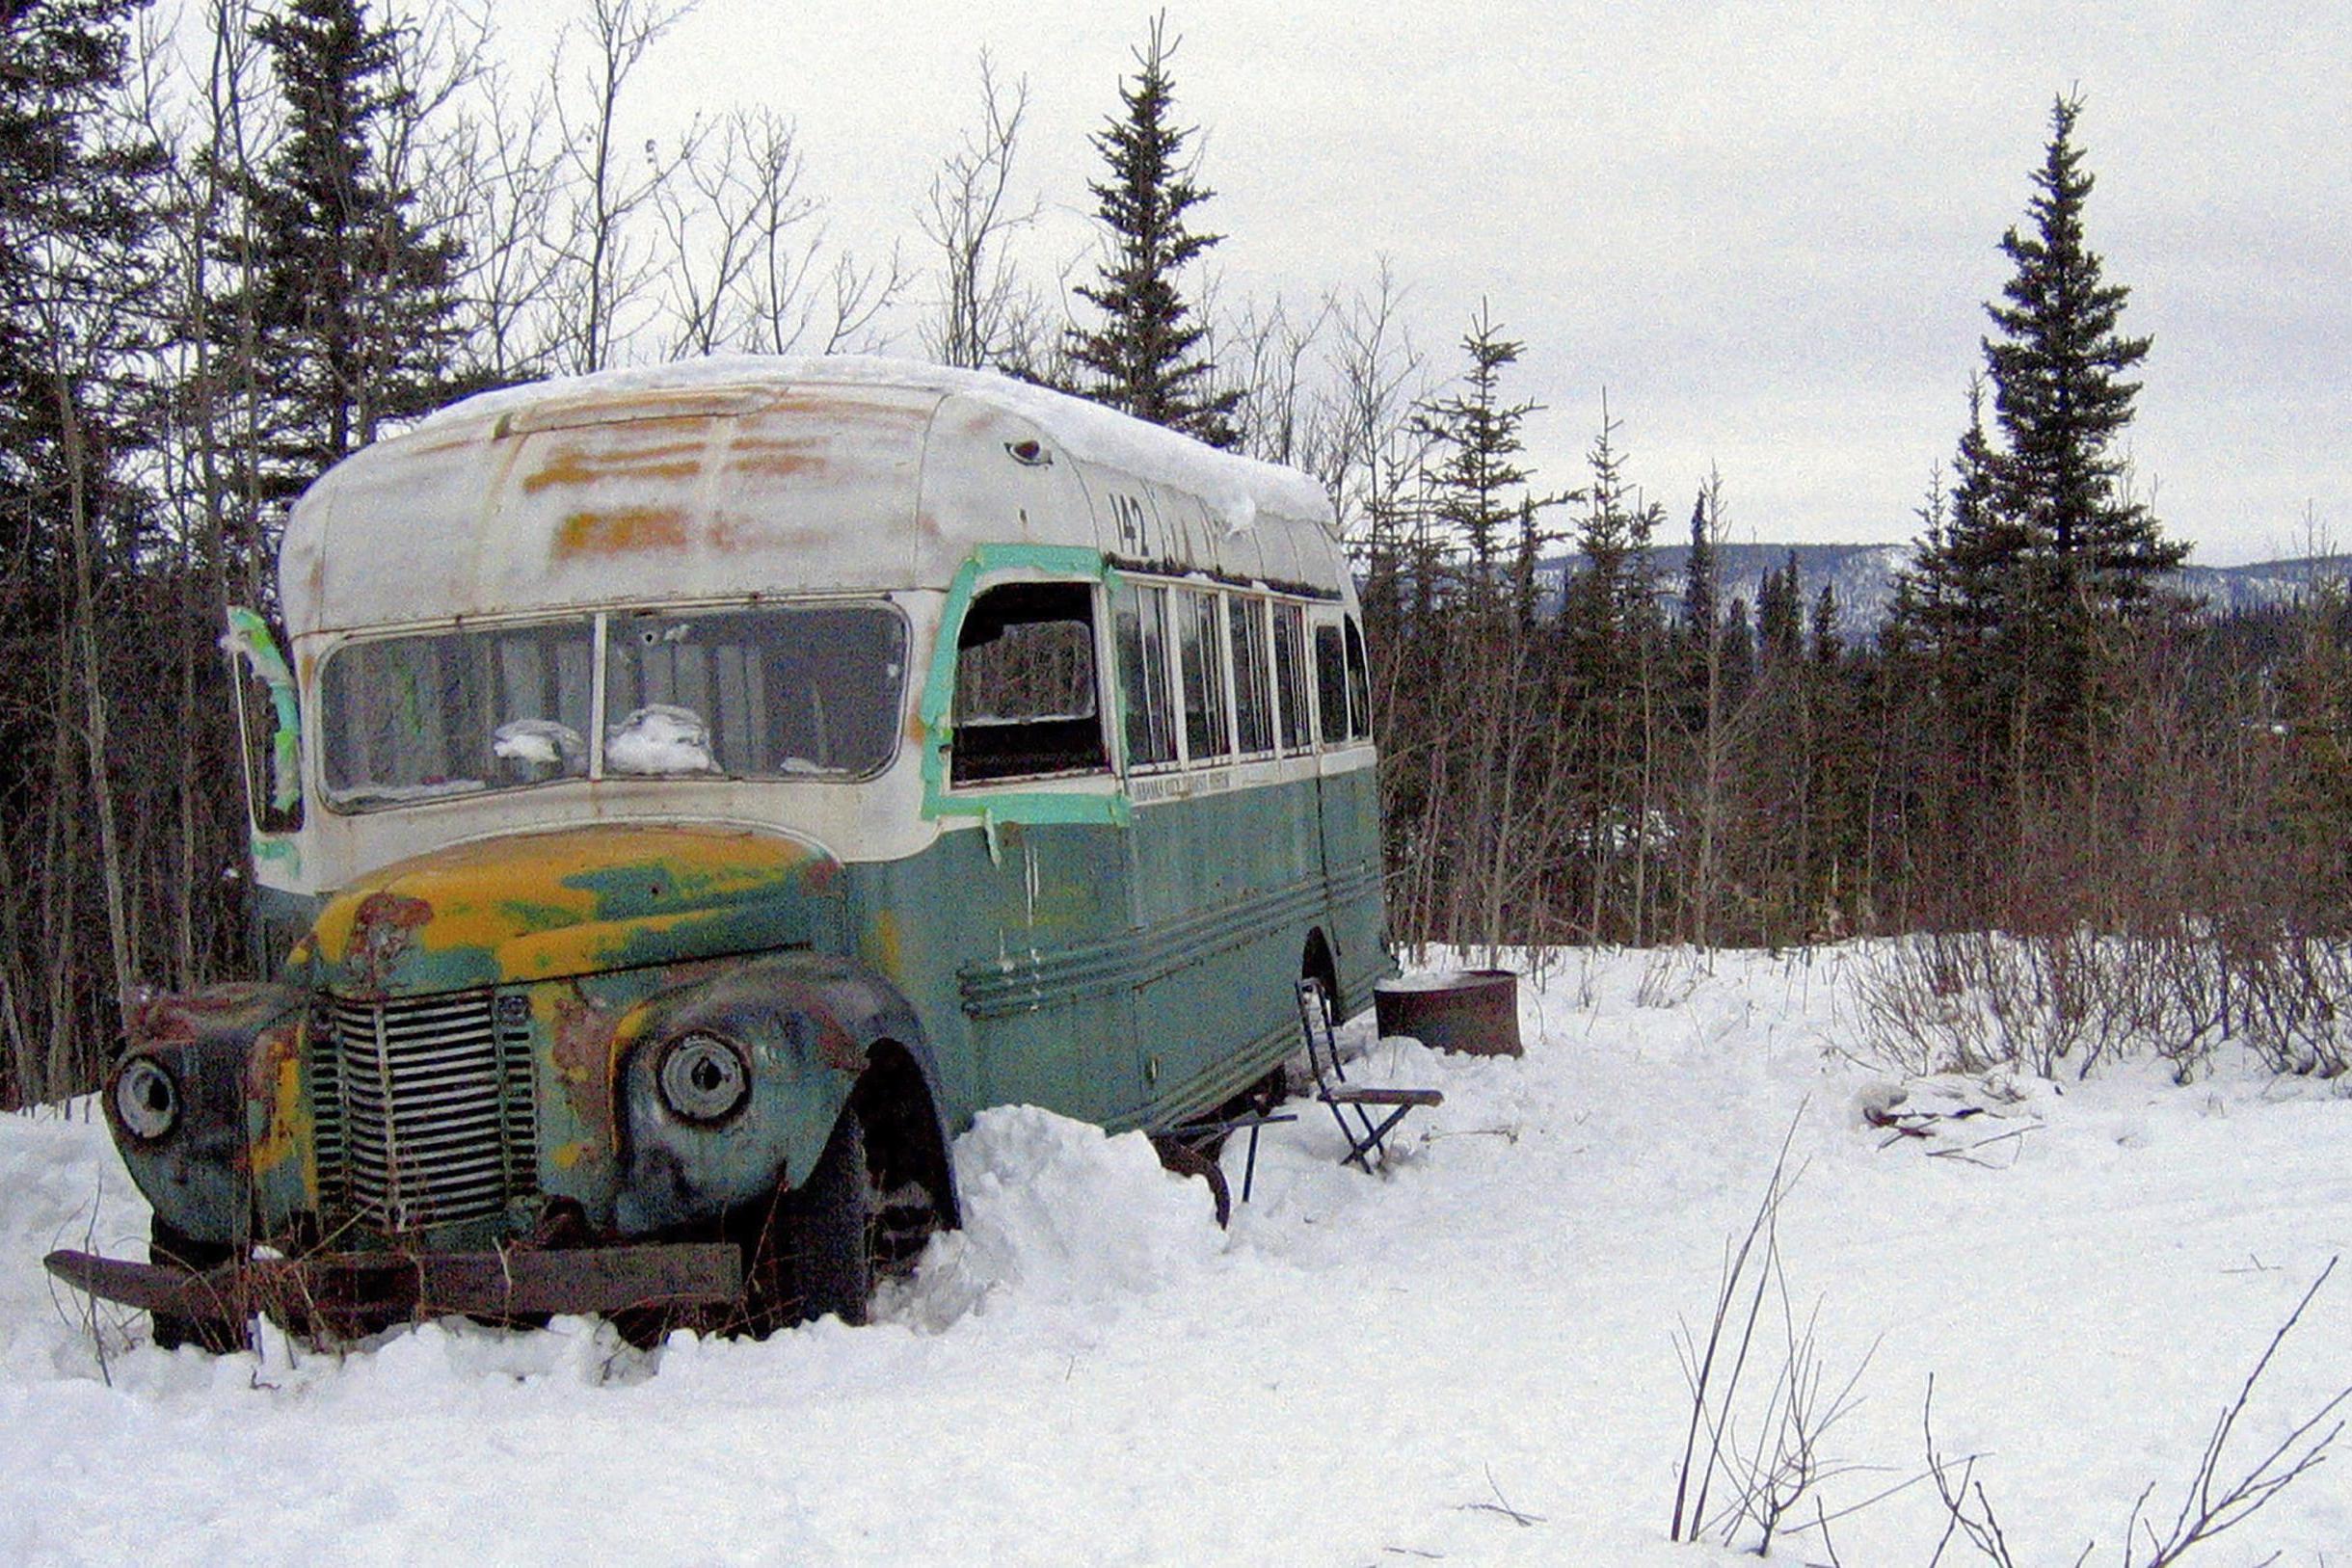 The abandoned bus where Christopher McCandless starved to death in 1992 on Stampede Road near Healy, Alaska, is pictured in 2006.